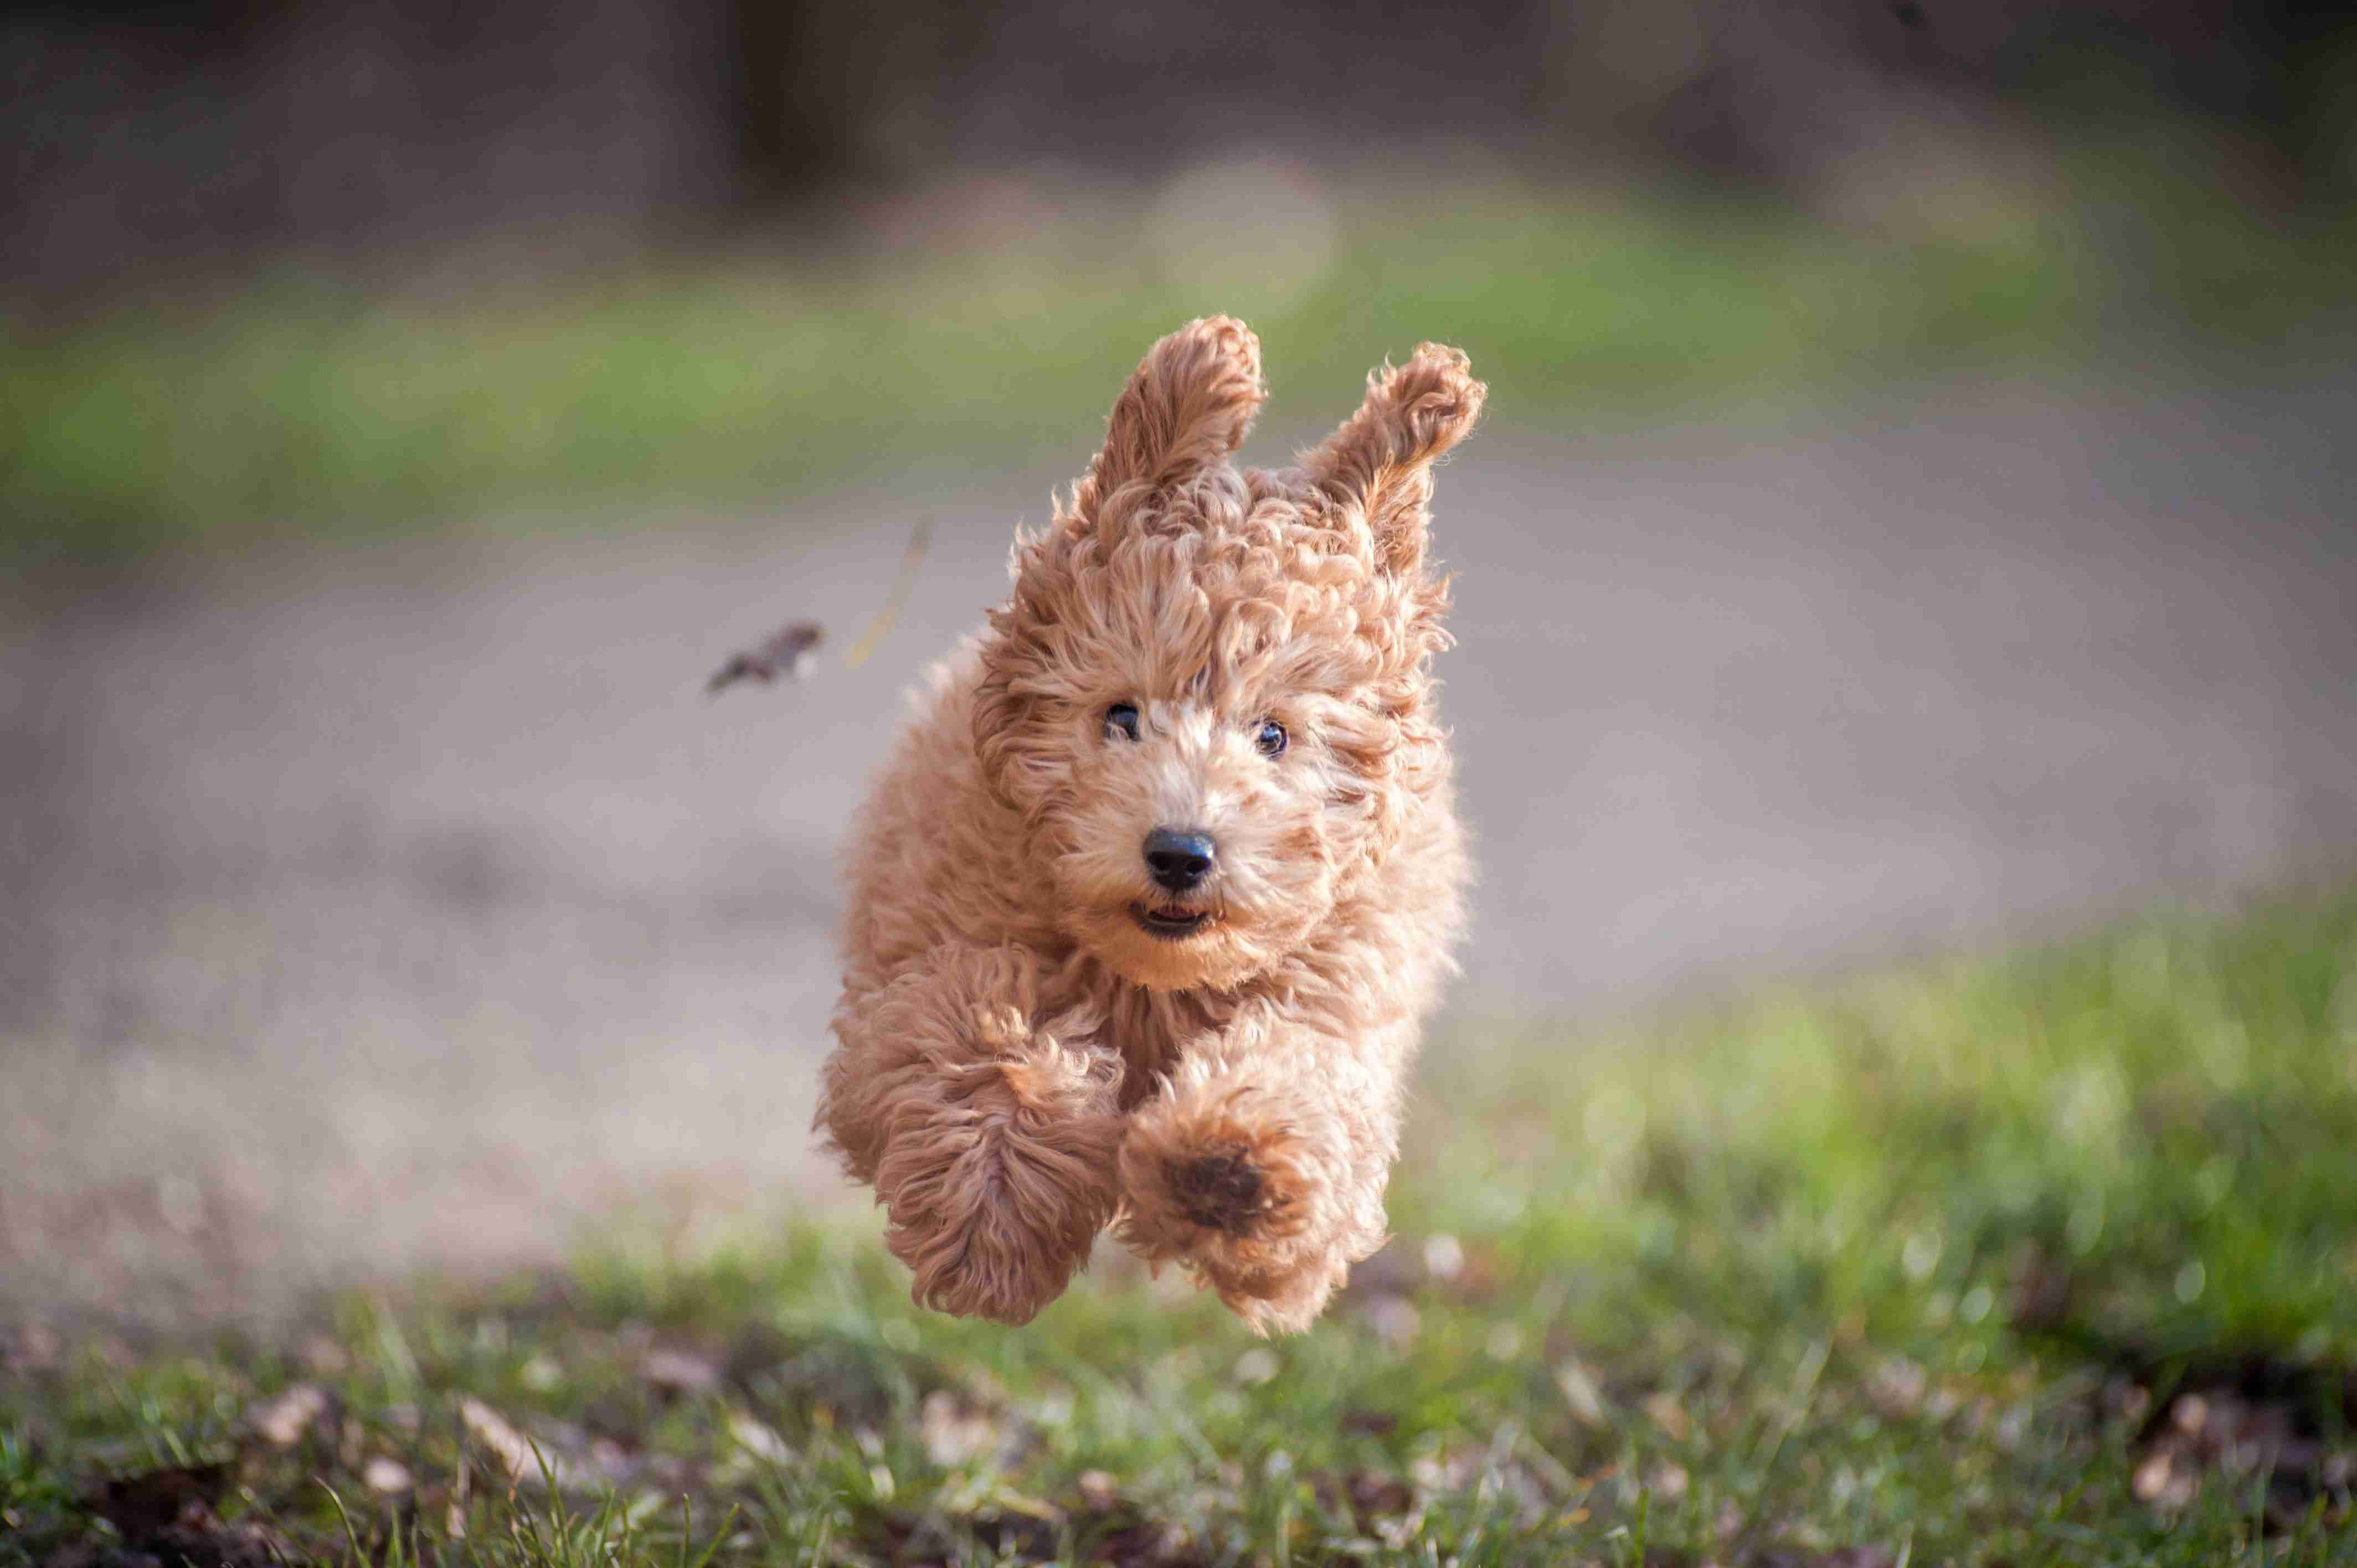 What are some ways to prevent excessive barking in your Poodle puppy?